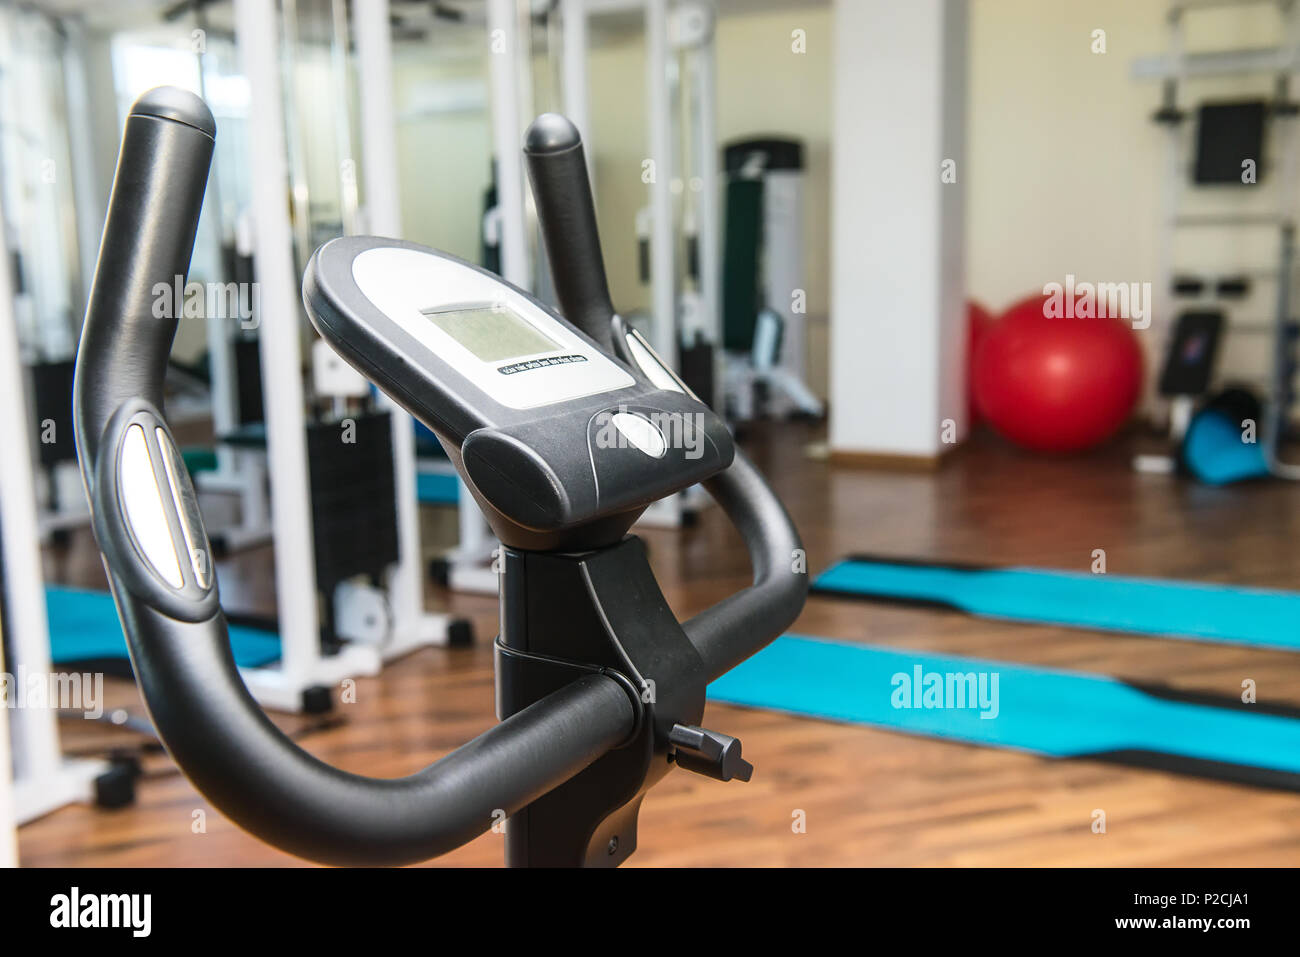 Different physiotherapy equipment in room Stock Photo - Alamy